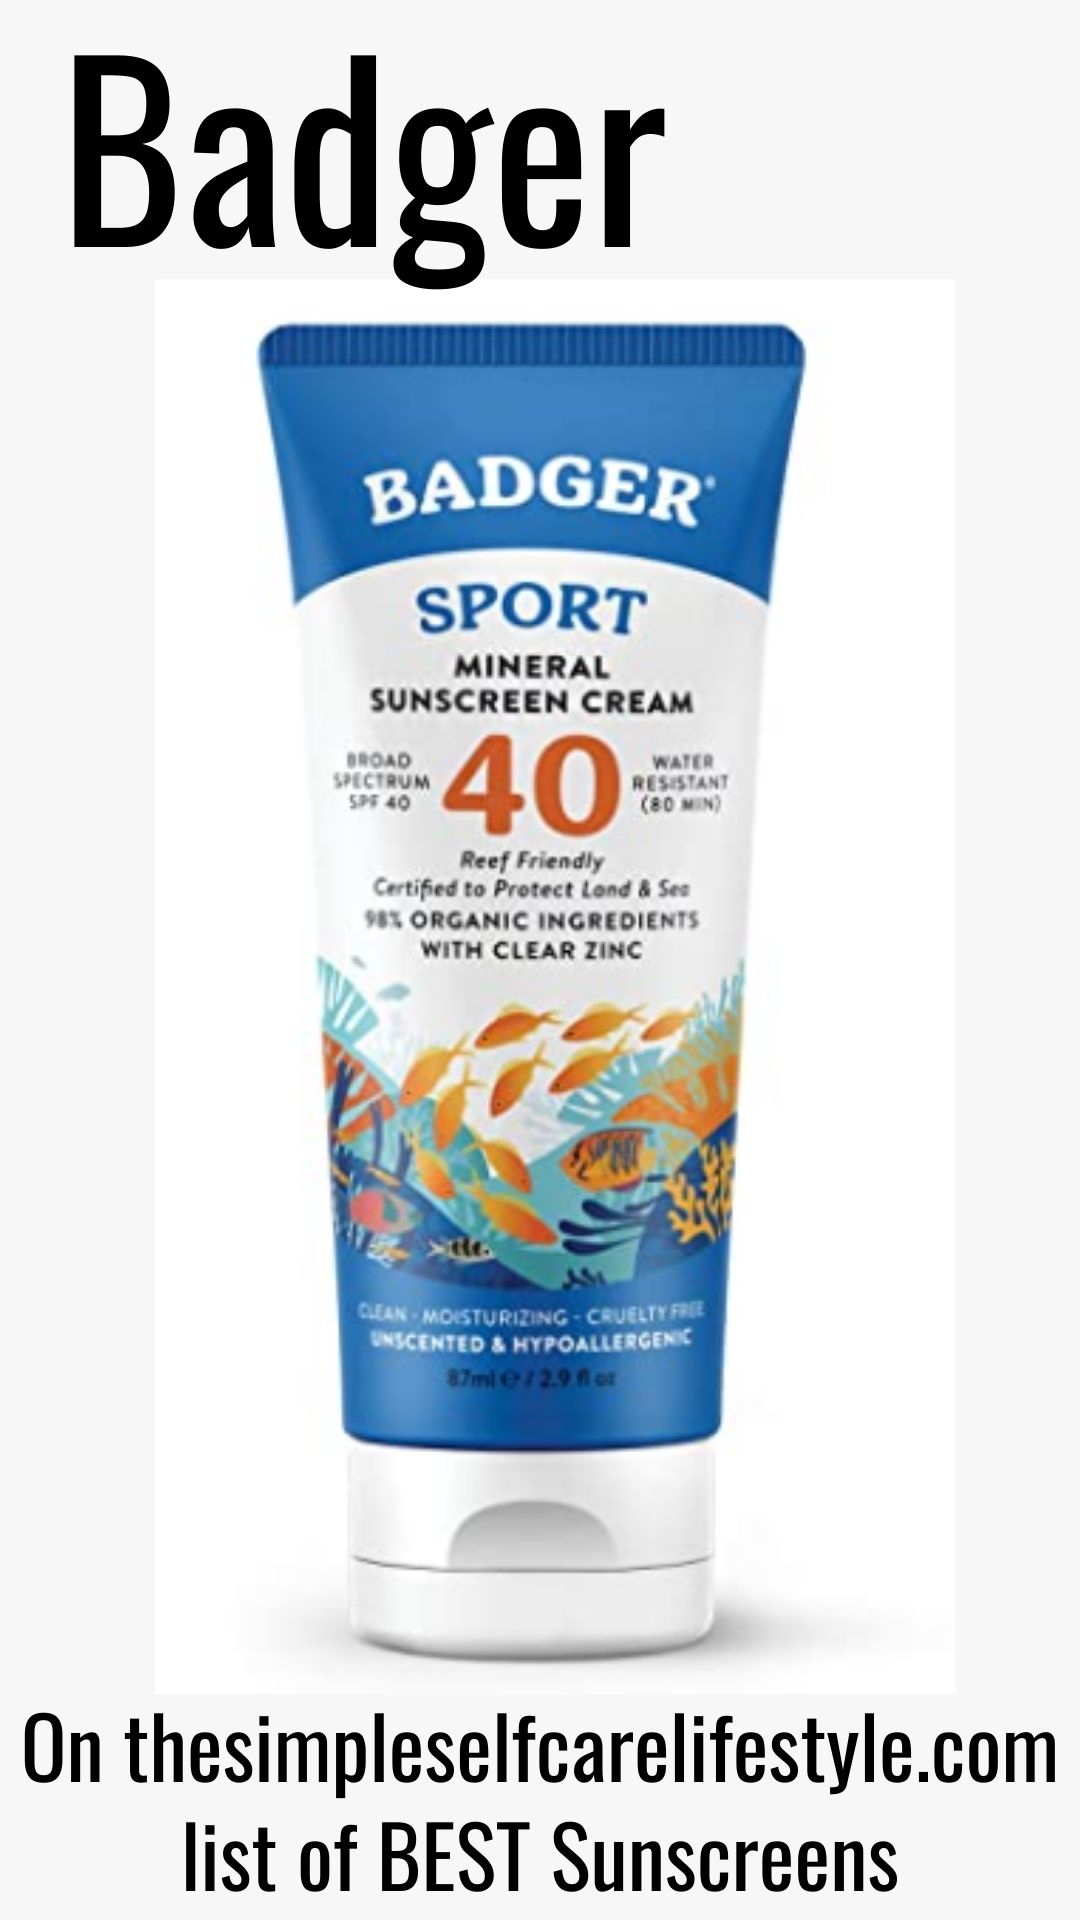 Badger Sunscreen in BEST sunscreen list made by thesimpleselfcarelifestyle.com